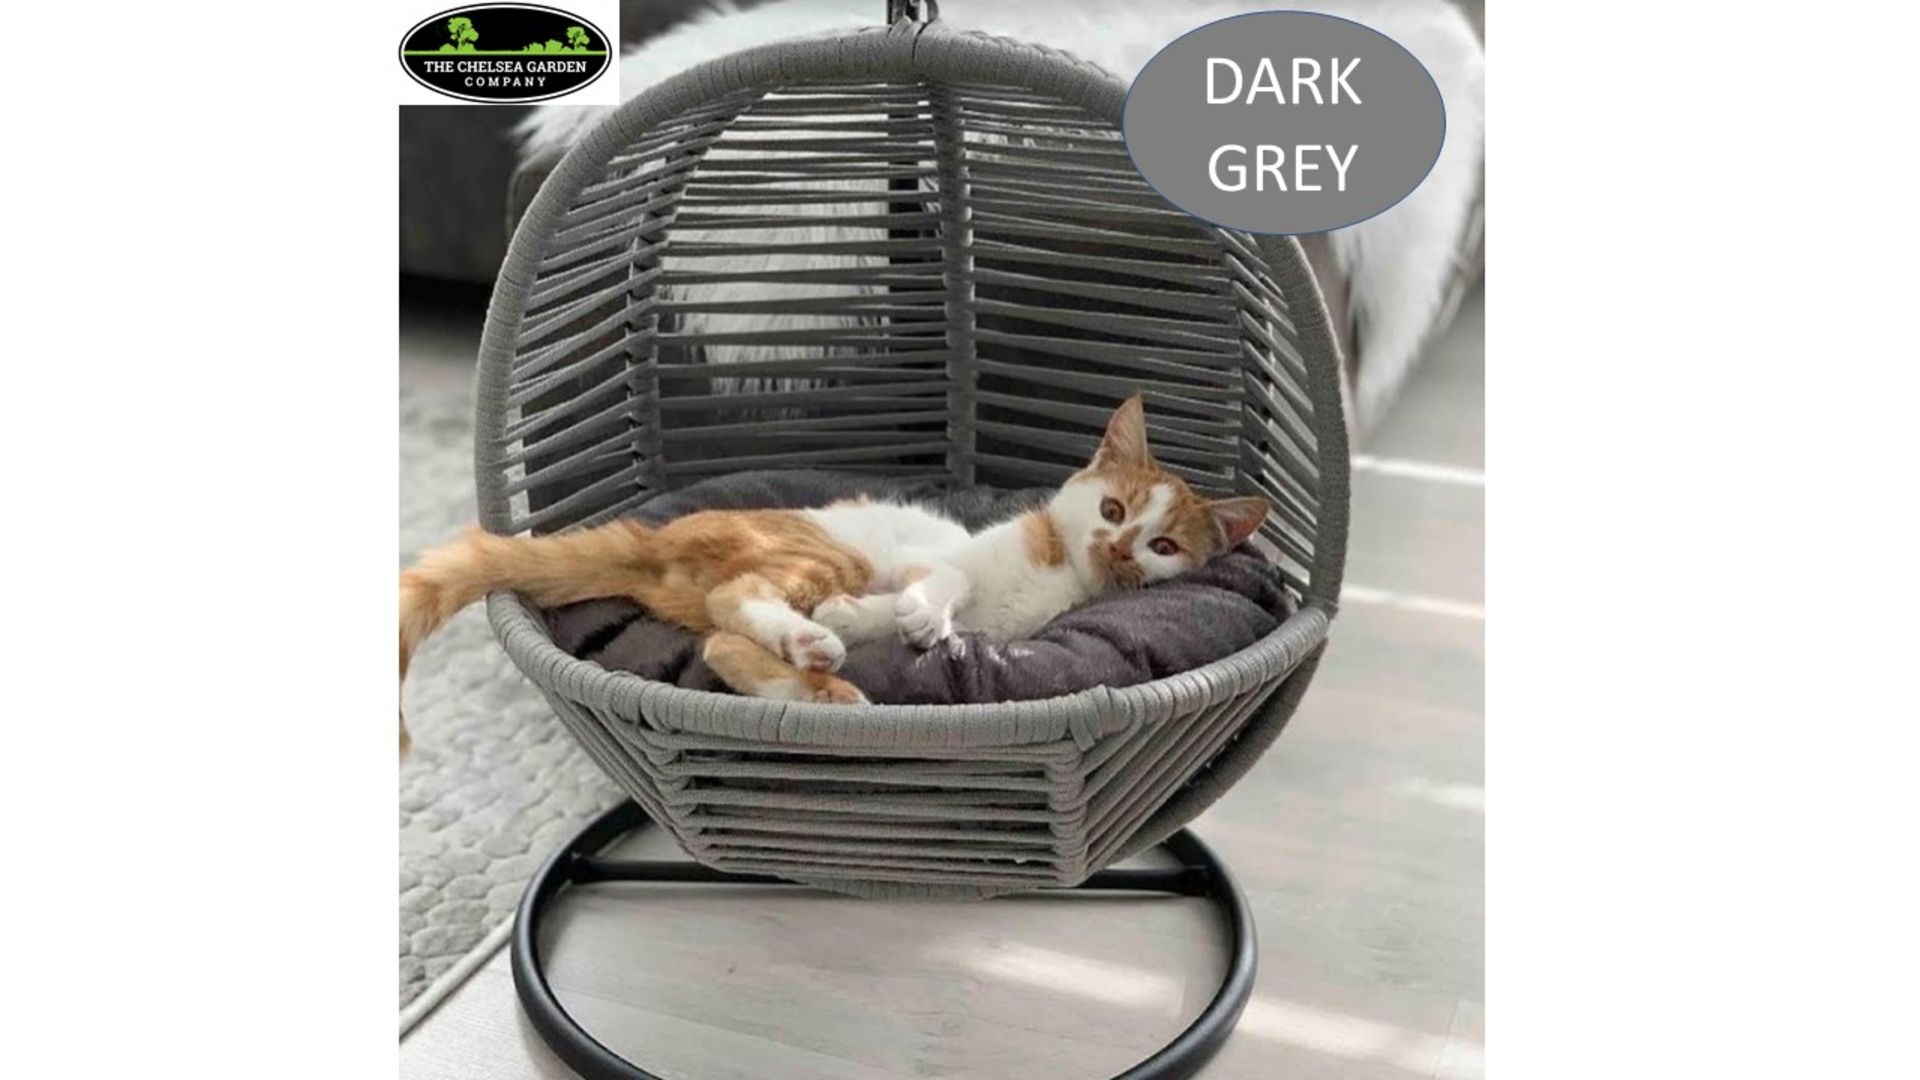 + VAT Brand New Chelsea Garden Company Cat Egg Chair - Dark Grey - Item Available Approx 28 Days